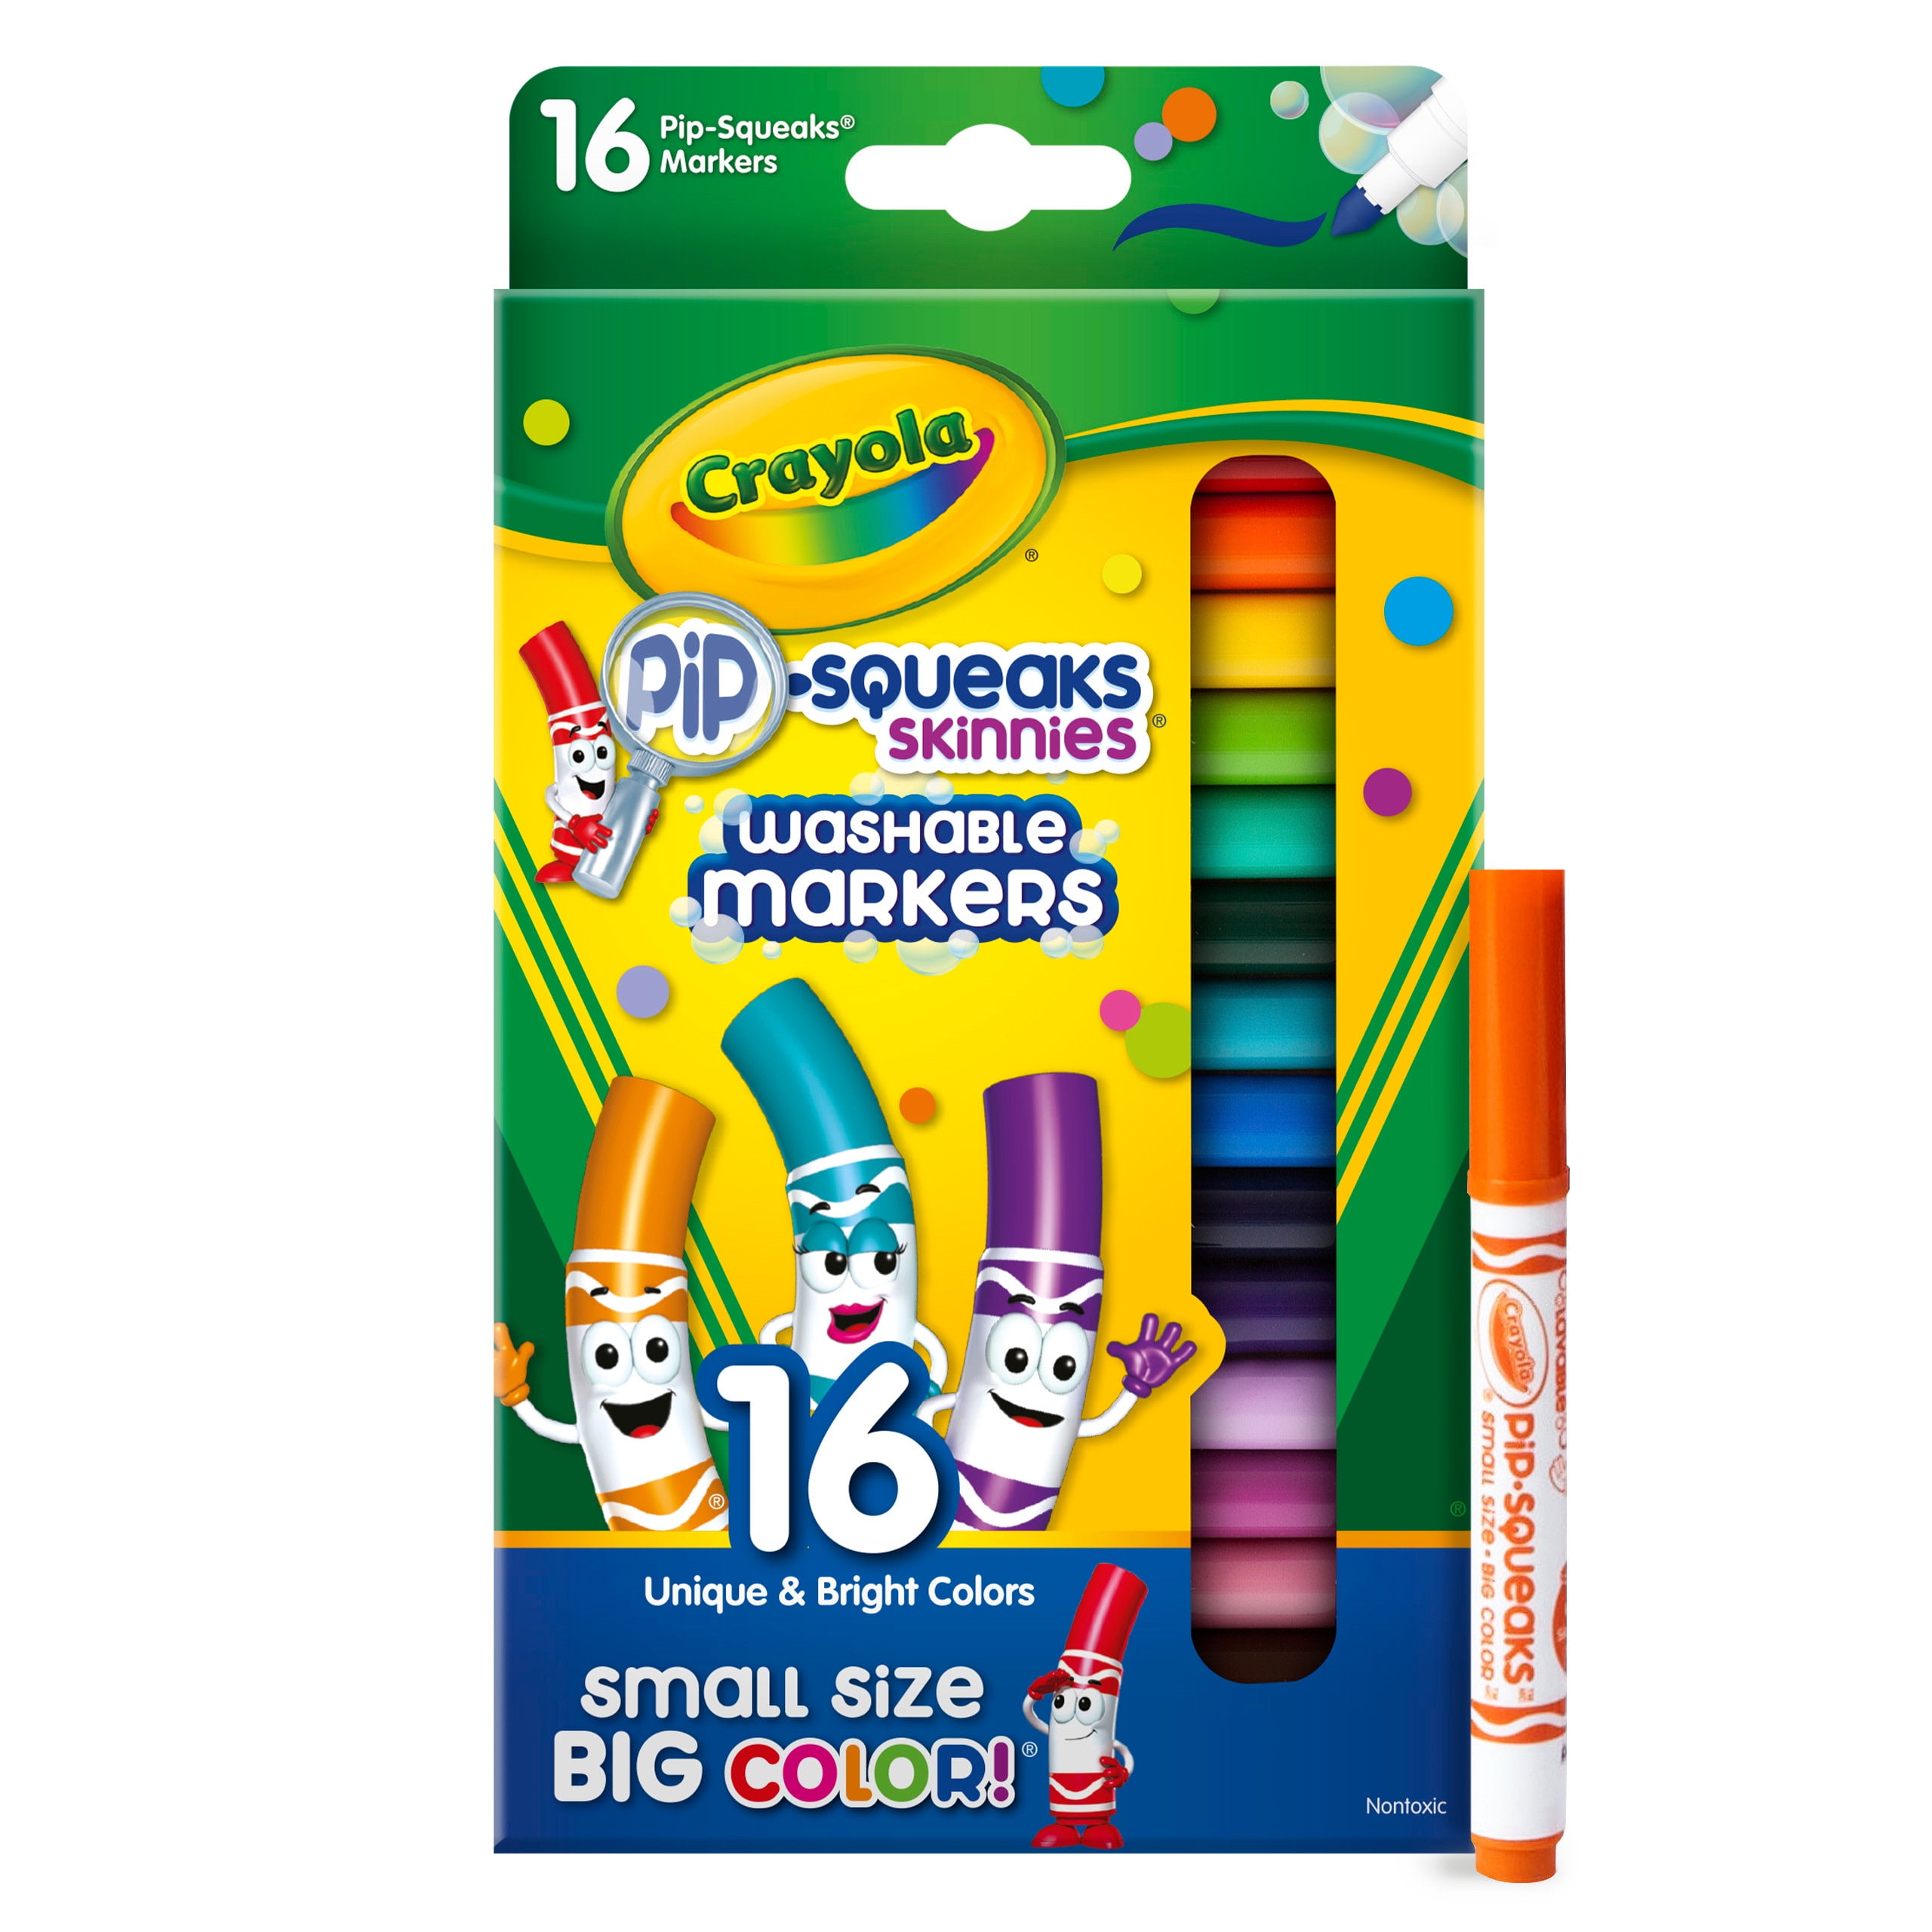 Crayola Pipsqueaks with Fantasy Points, 16pcs.